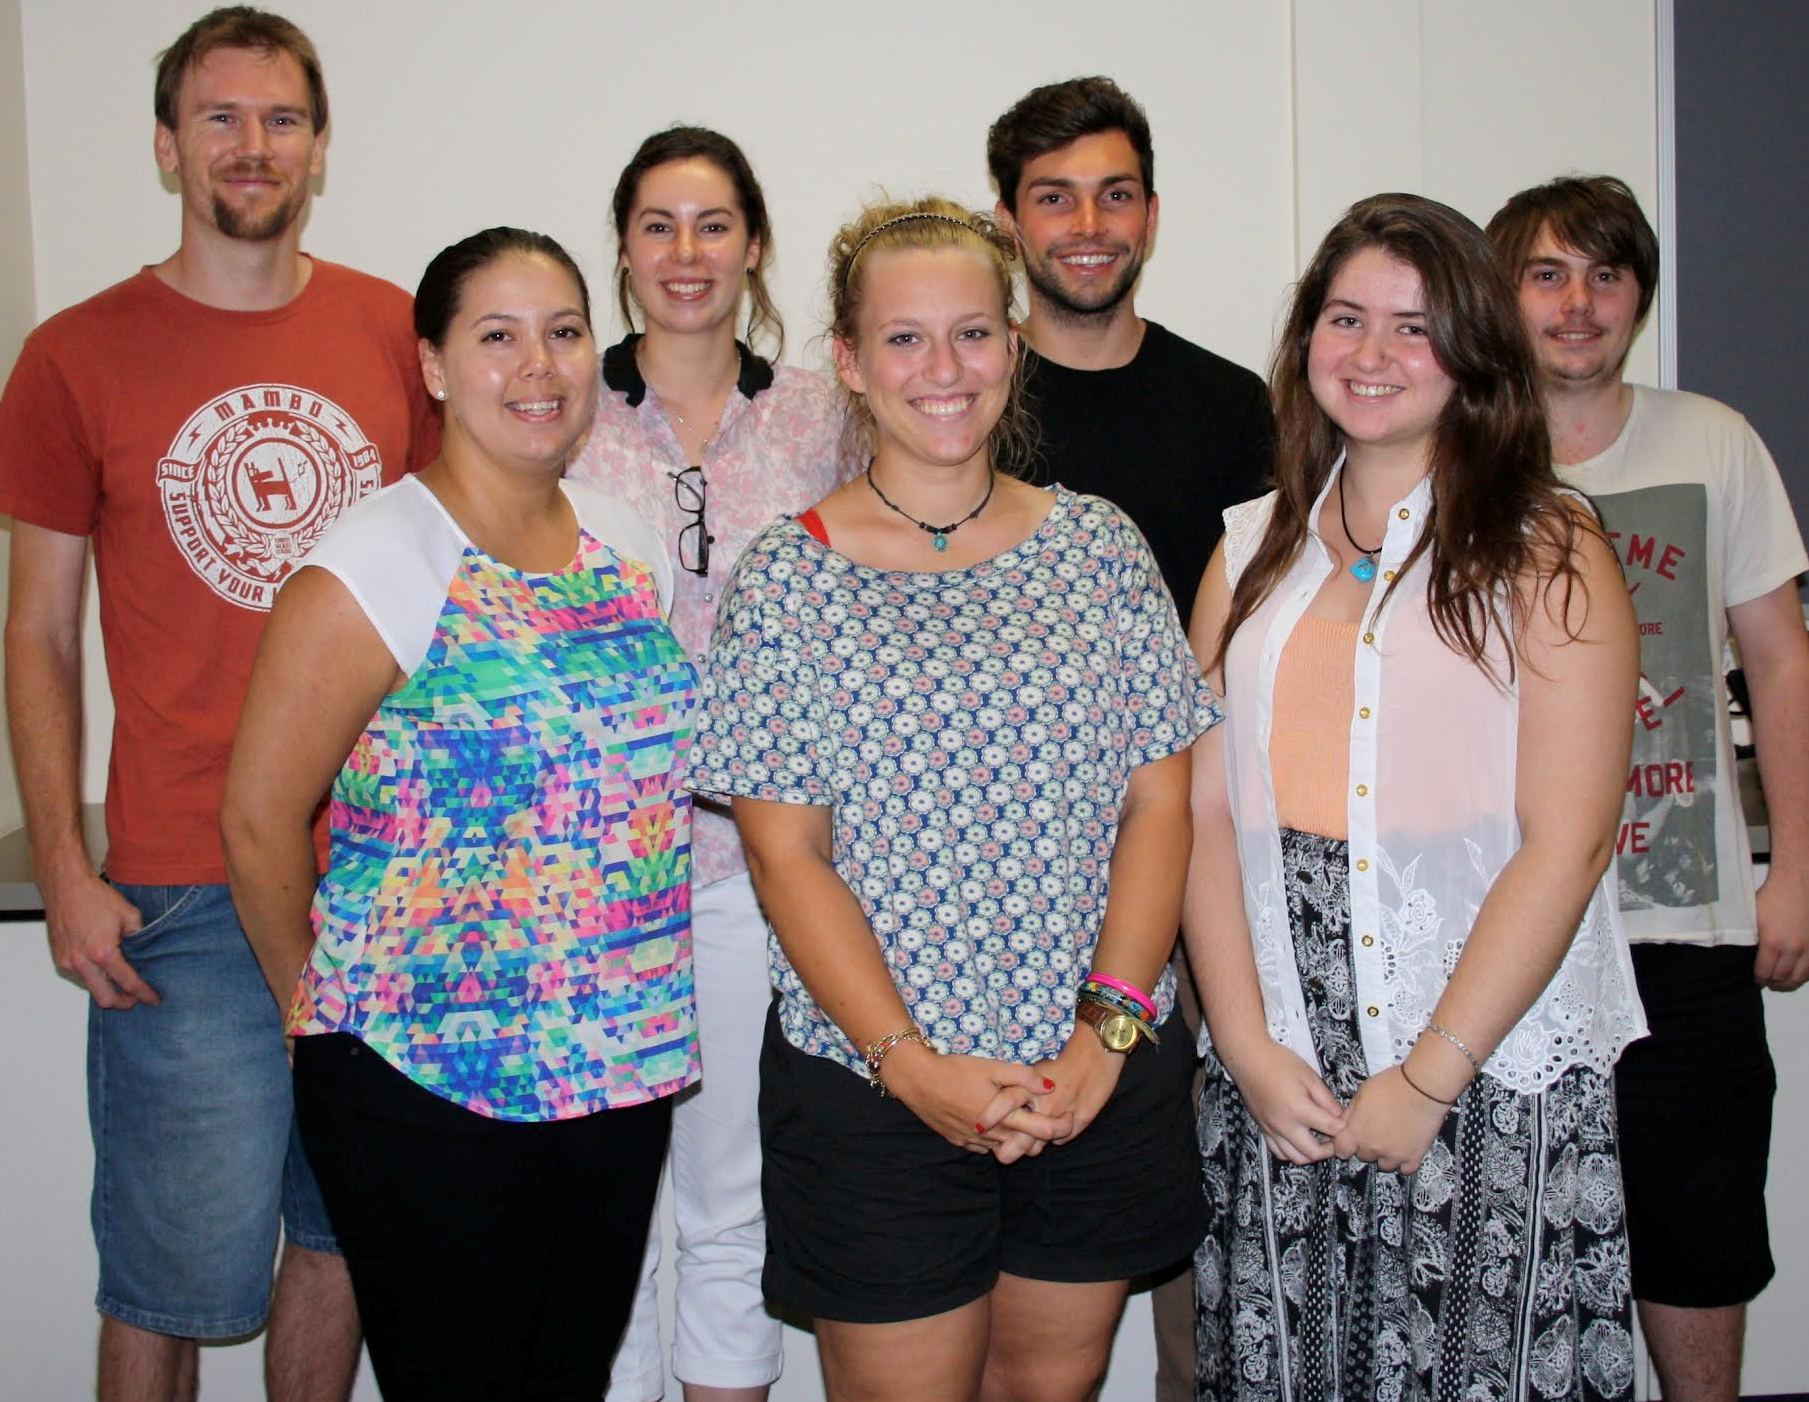 Indigenous Summer Research Fellowship Program participants. From left: Christopher Lake, Jean Pepperill, Anita Nahuysen, Shelby Simpson, Kelly Dalley, Eden Little, Jase Jackson. Absent: Hannah Allan